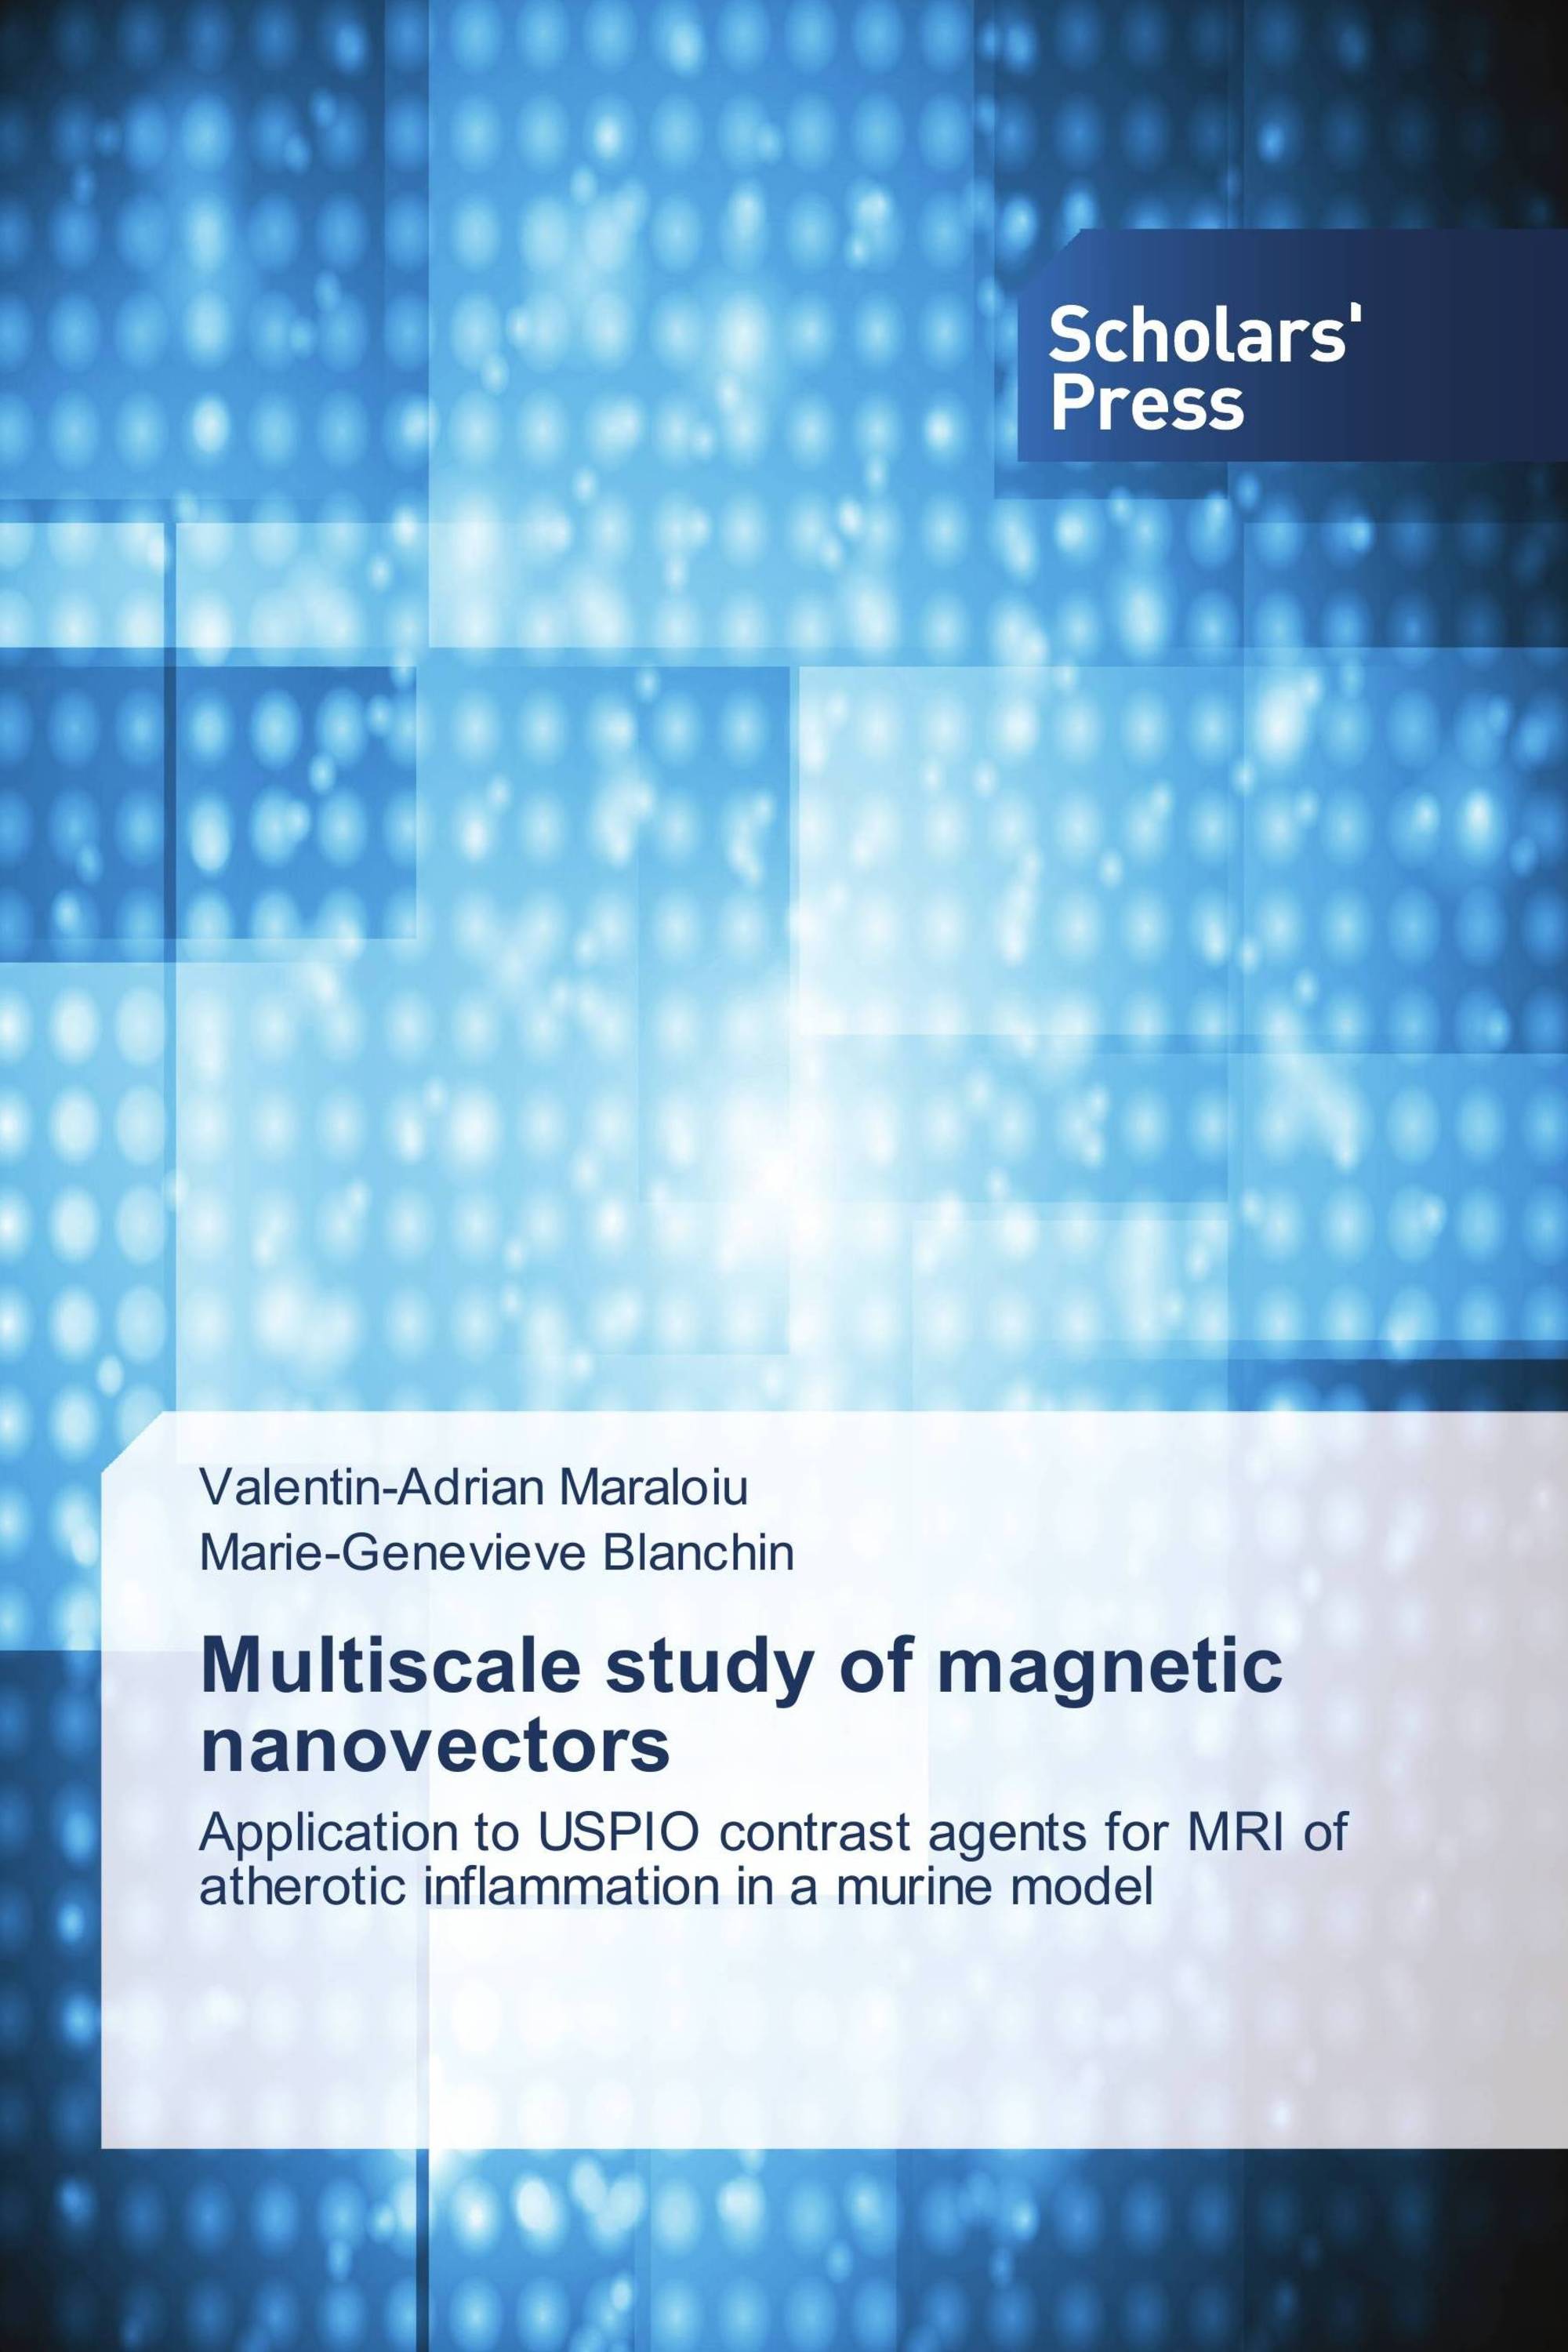 Multiscale study of magnetic nanovectors